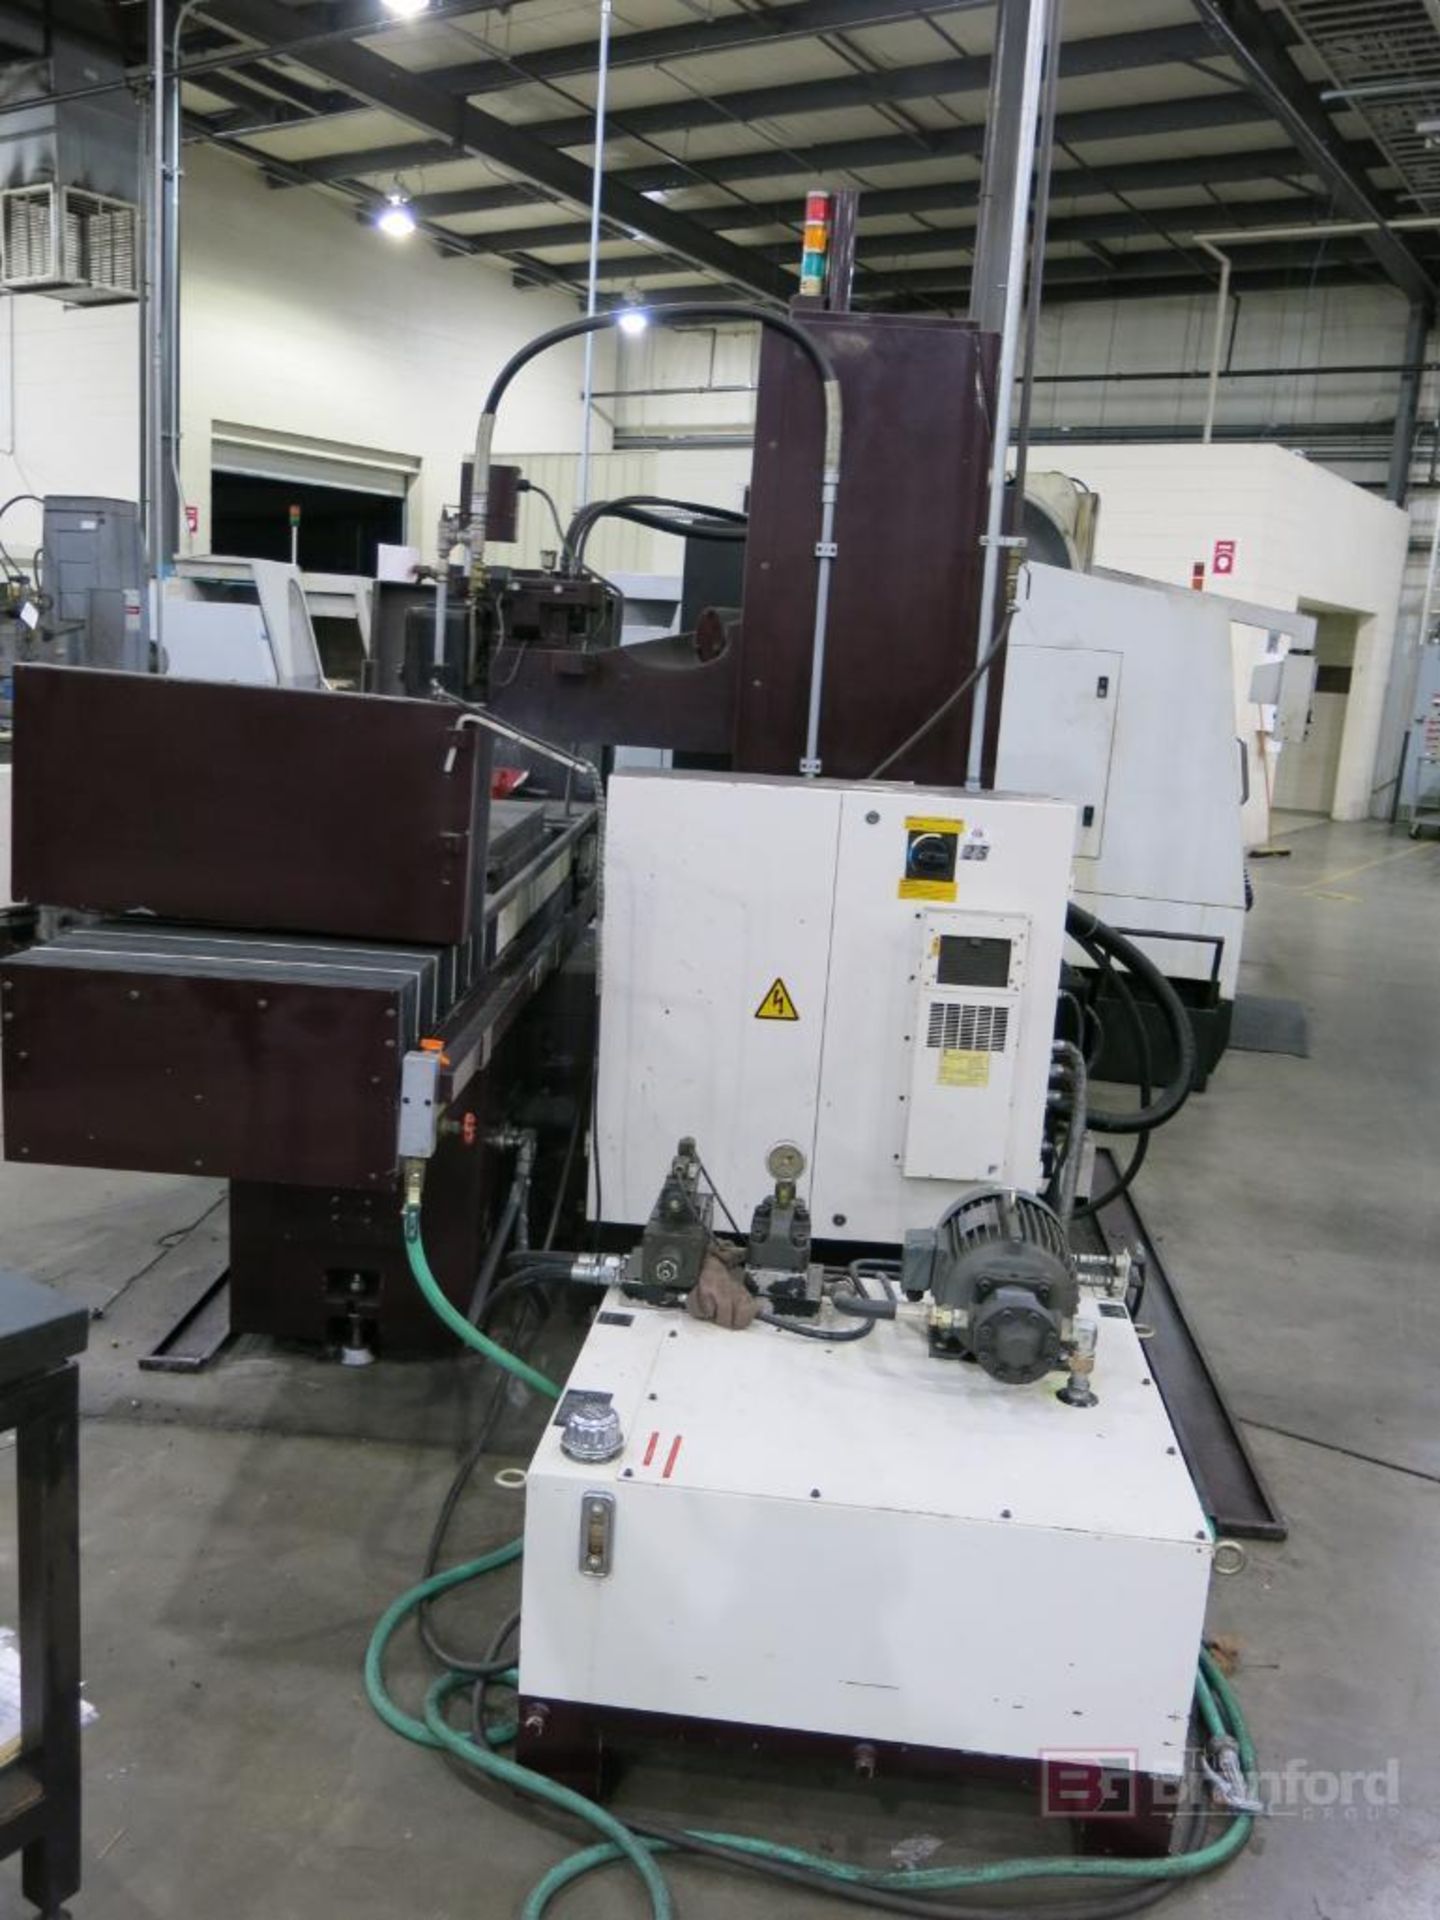 Chevalier Model FSG-240ADII Surface Grinder w/ 20" x 40" Magnetic Chuck - Image 5 of 6